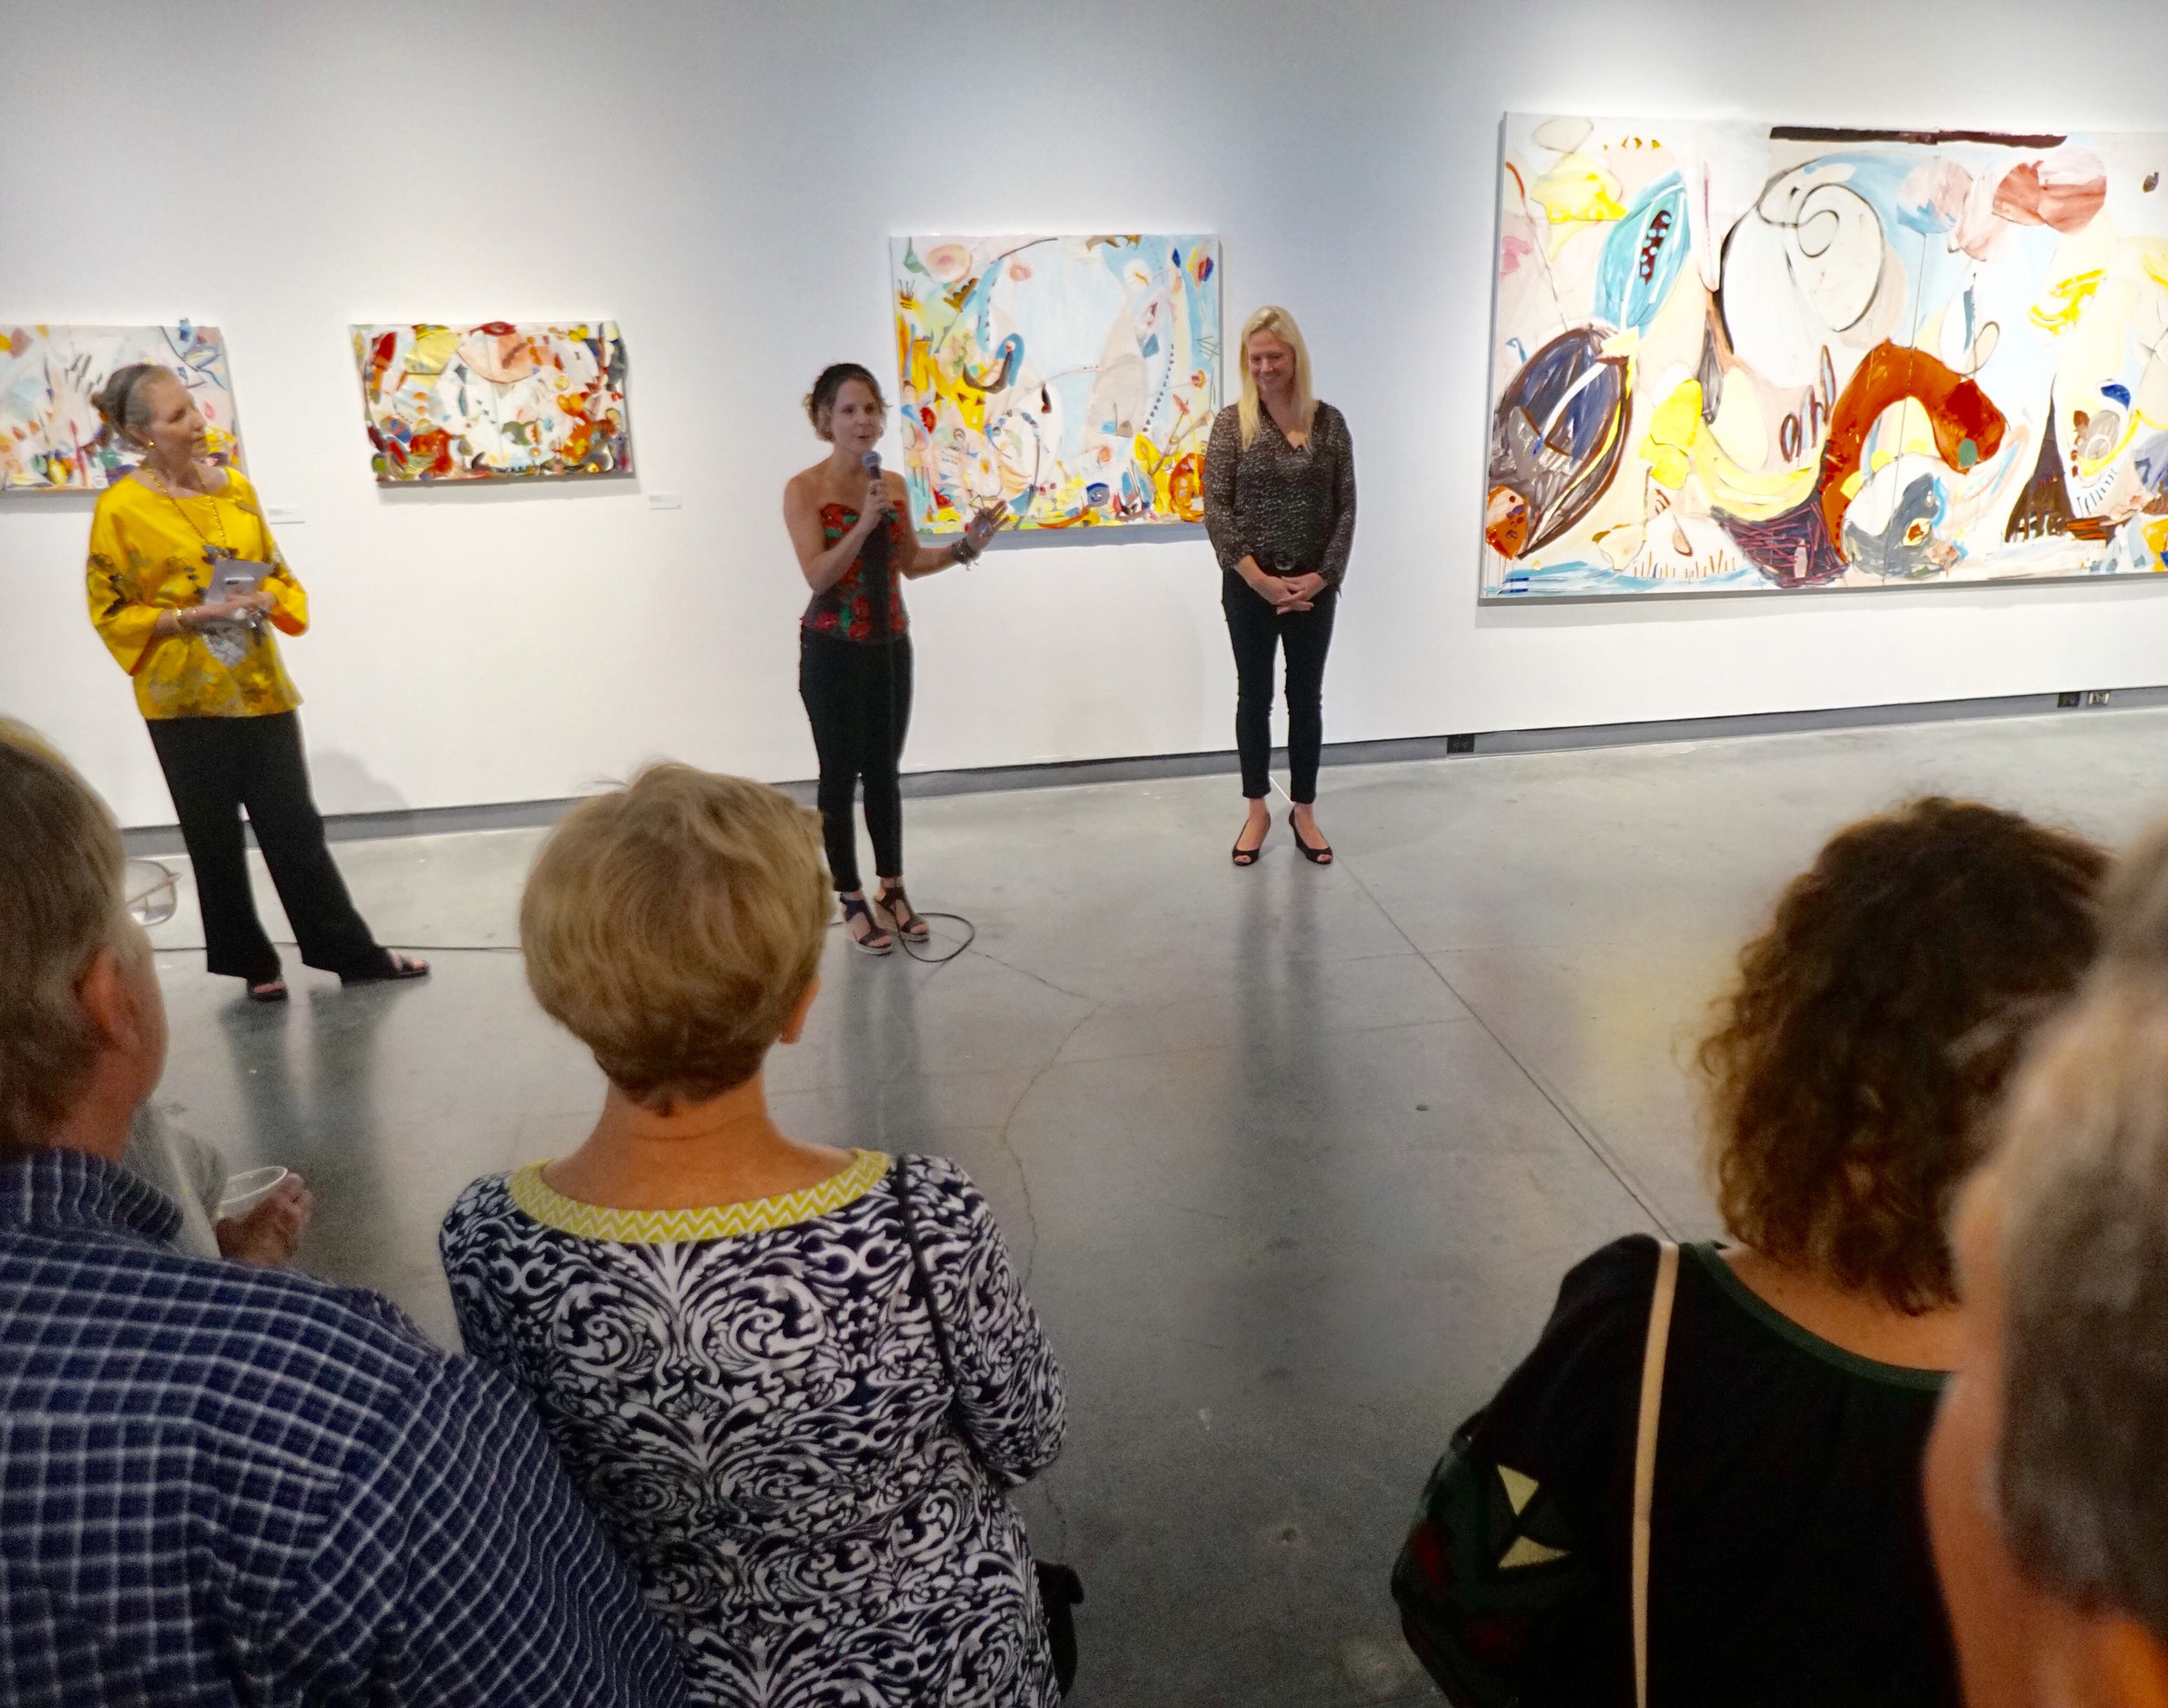 Opening Reception: Wednesday, August 16, Photo Credit: Dan Brody